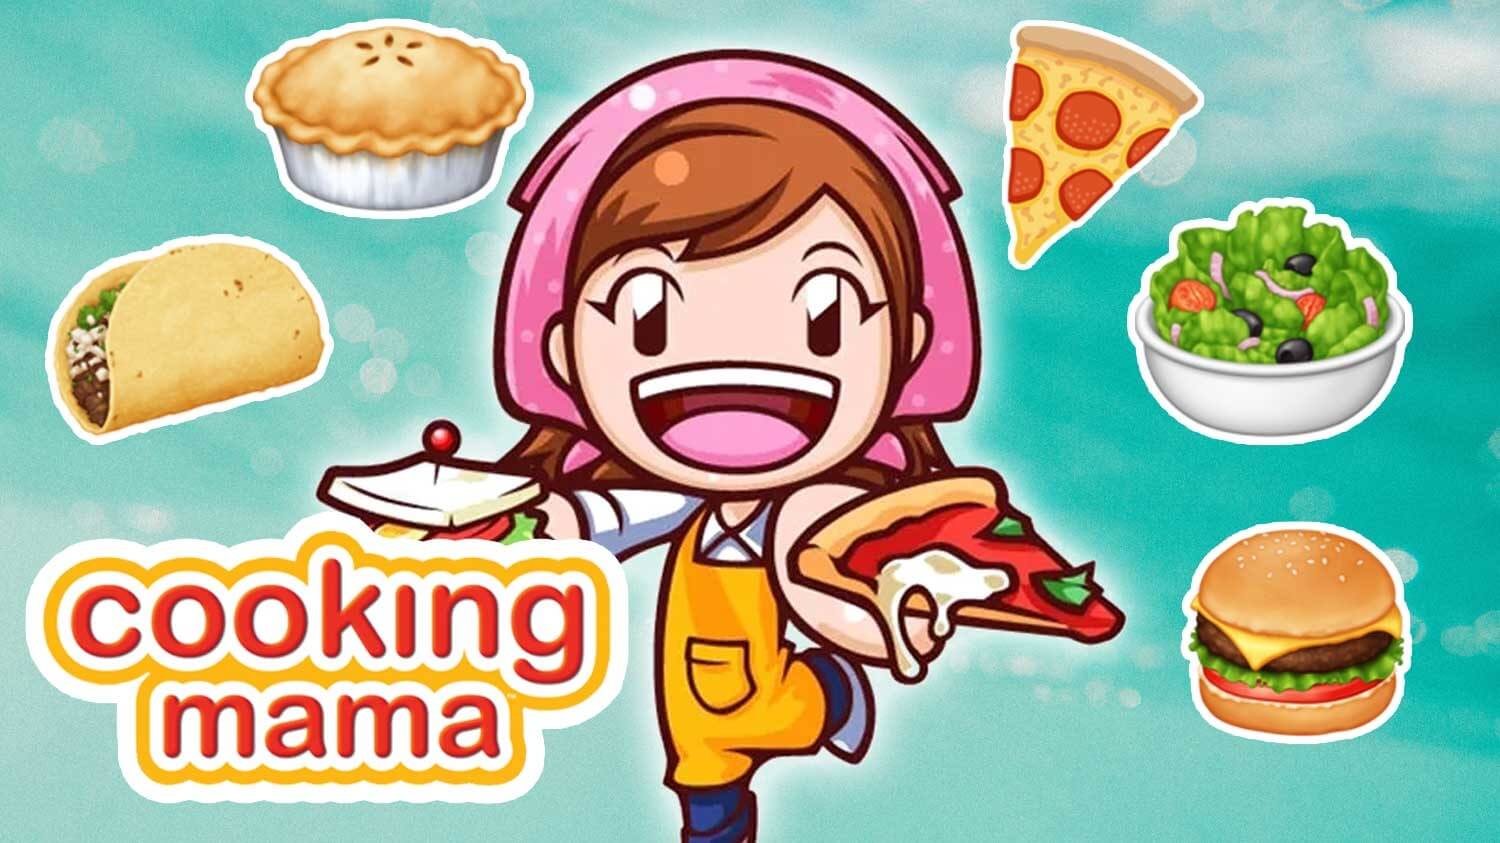 new cooking mama game